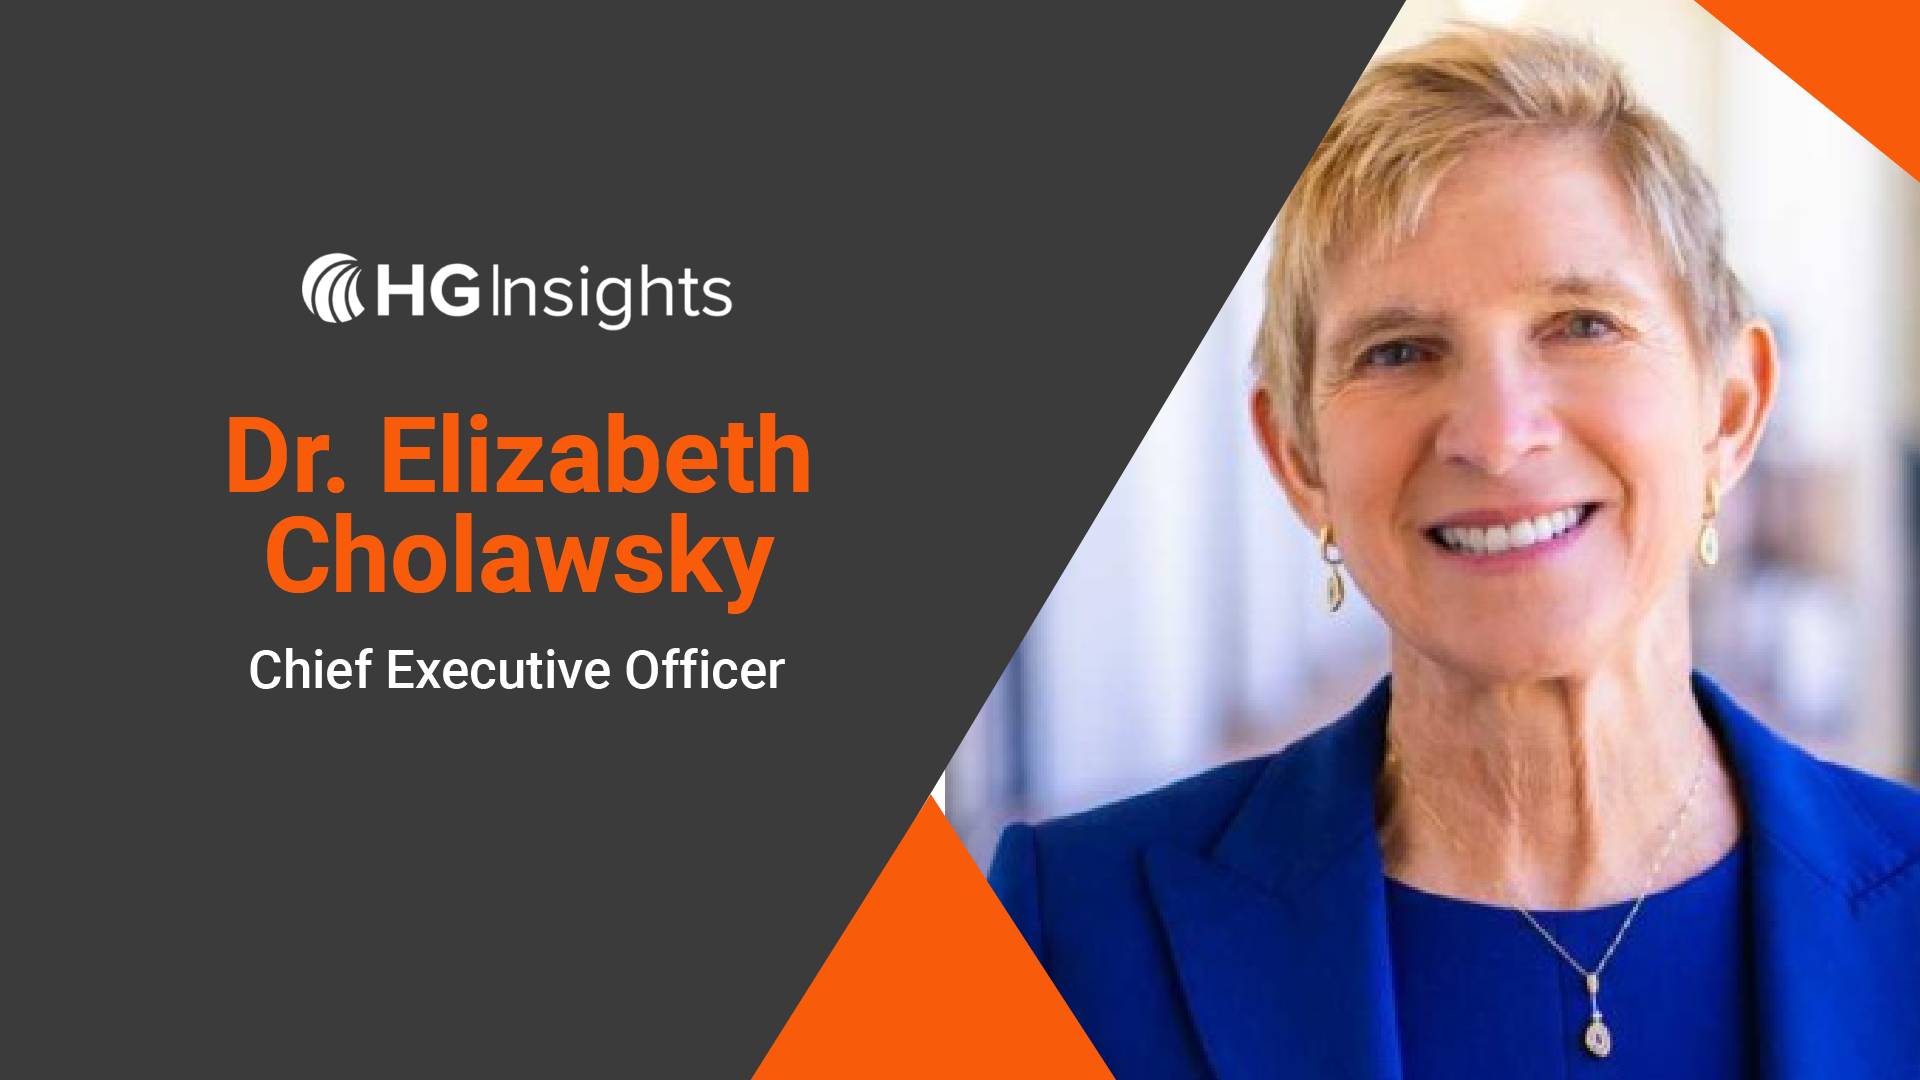 MarTech Edge Interview with Dr. Elizabeth Cholawsky, Chief Executive Officer, HG Insights